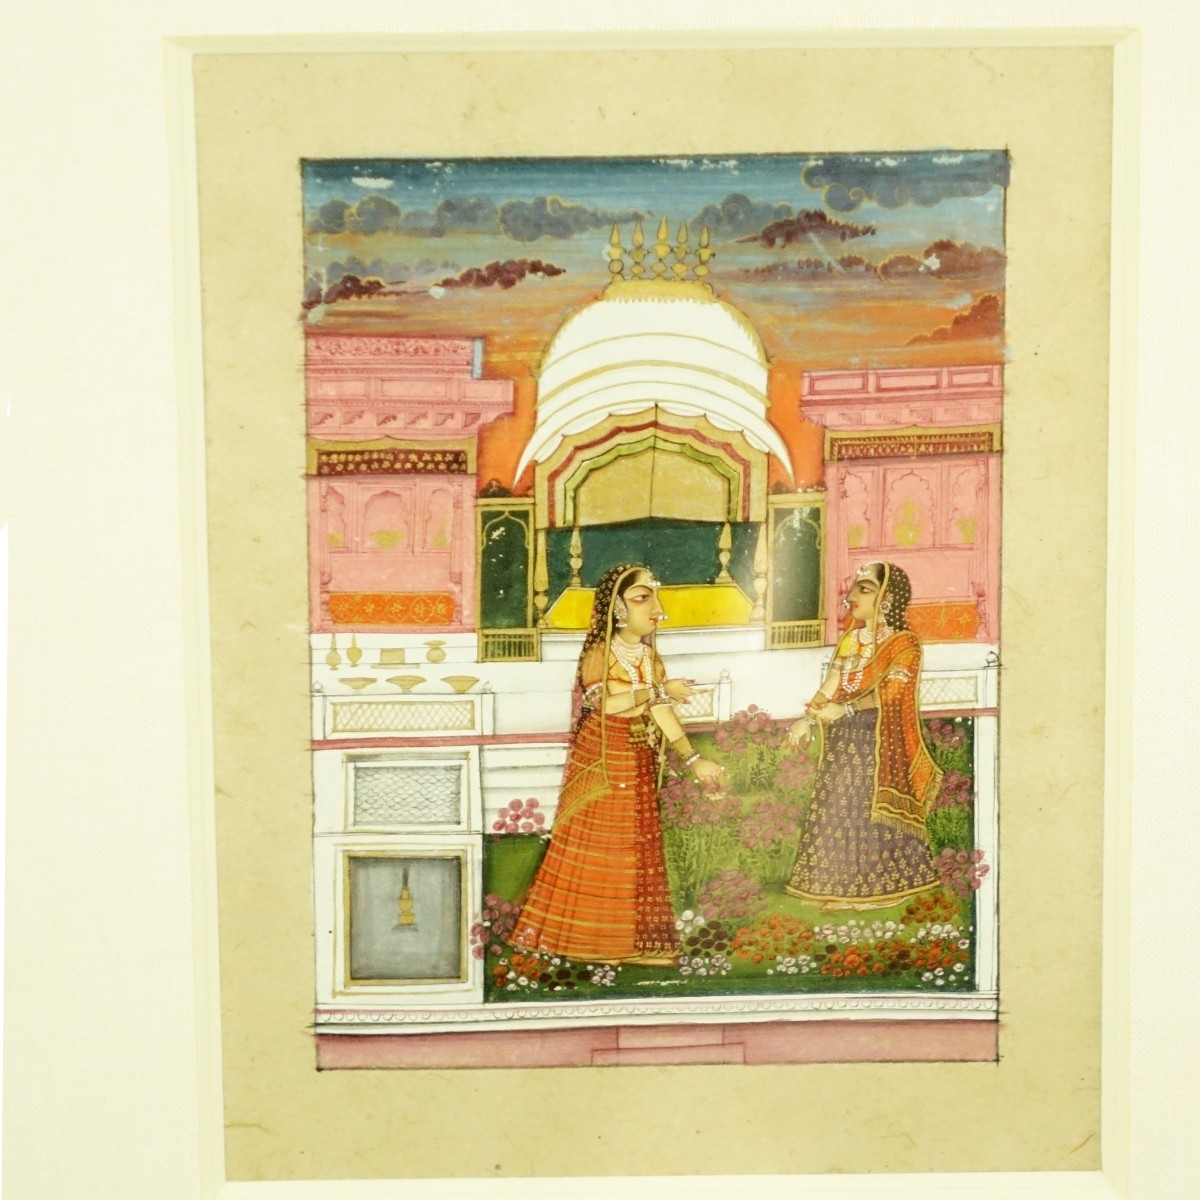 Pair of 18th Century Provincial Mughal Miniatures